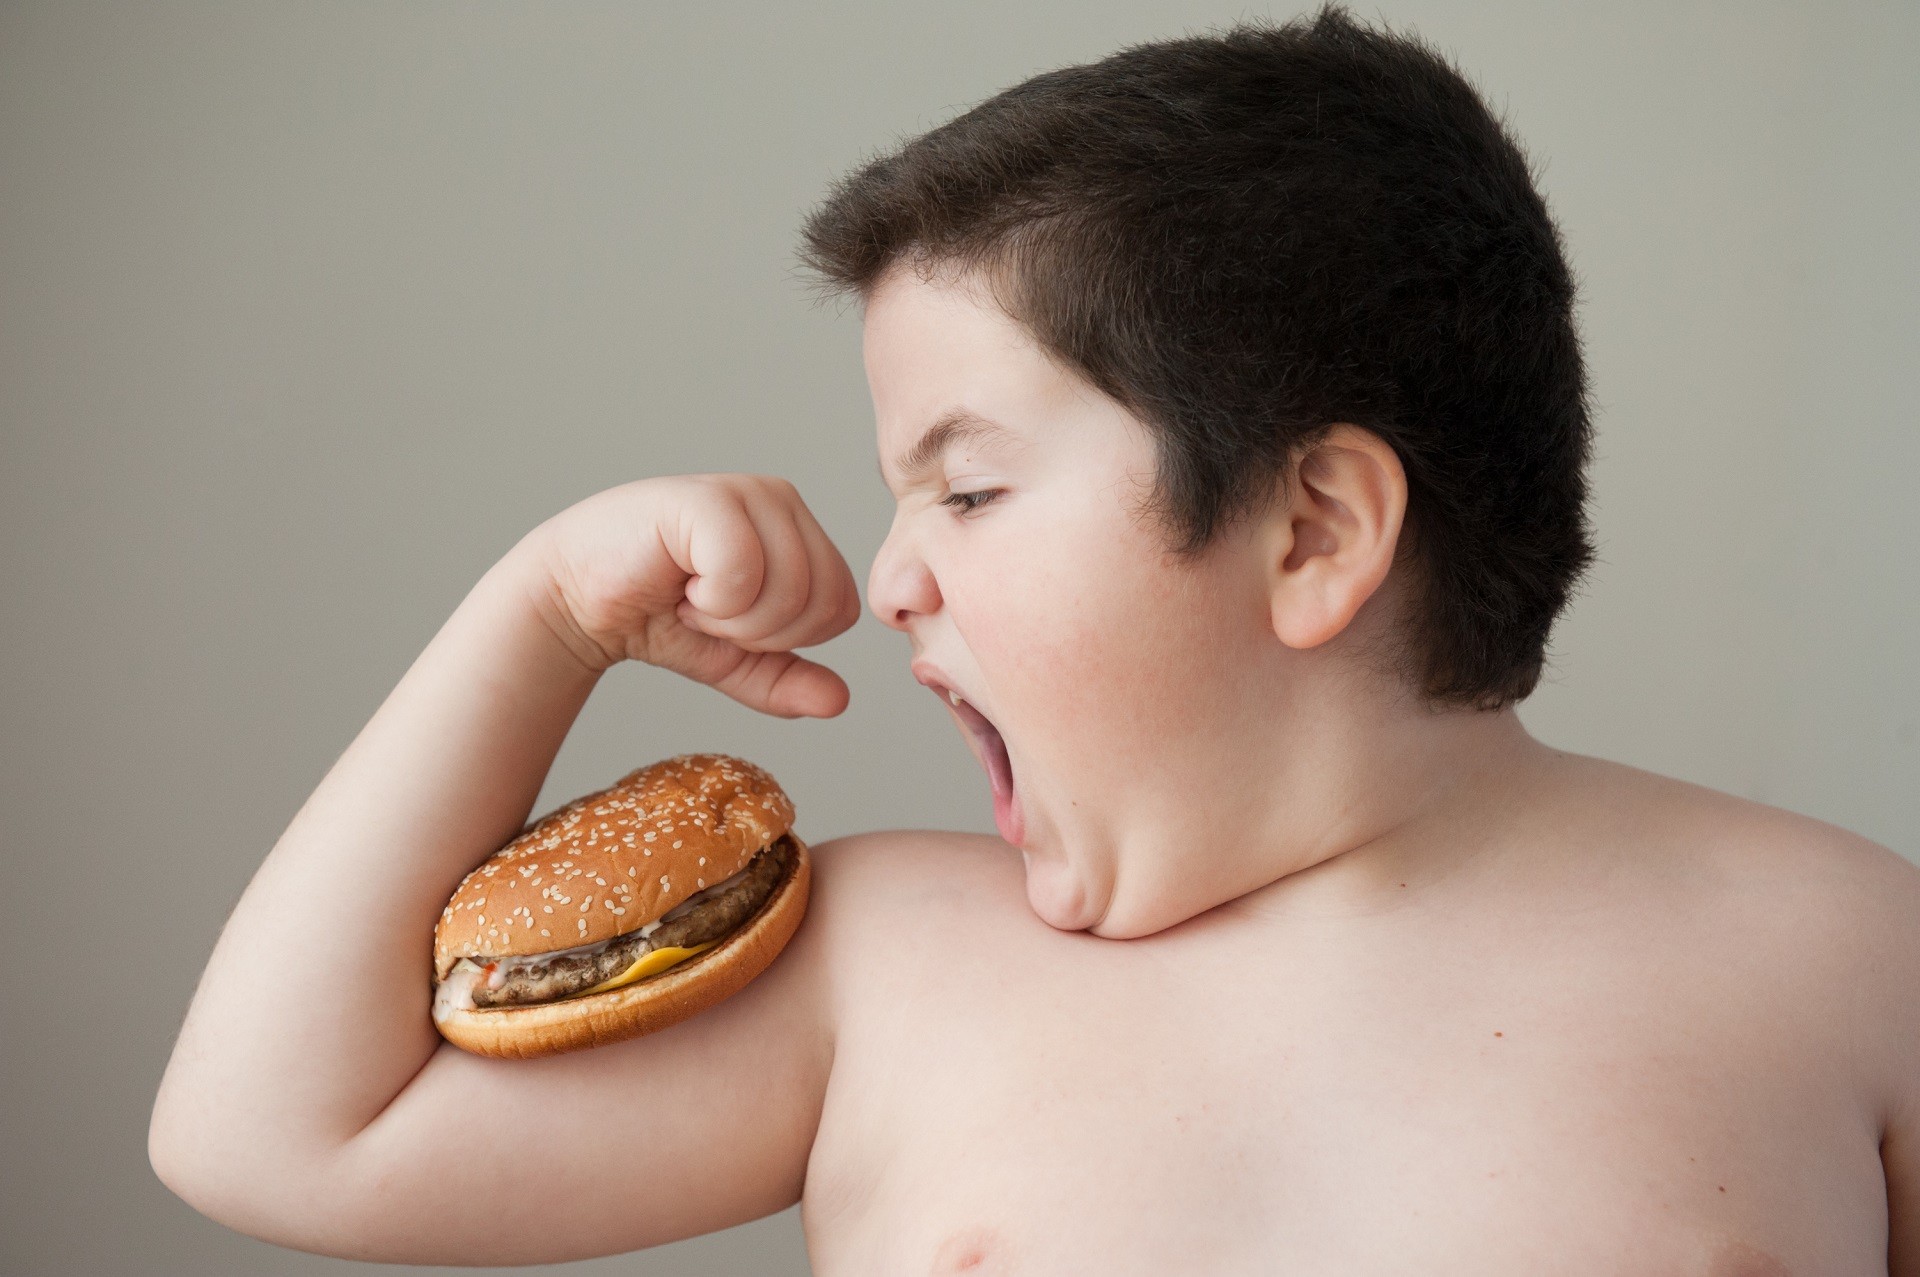 7 Causes of Childhood Obesity and How to Tackle It